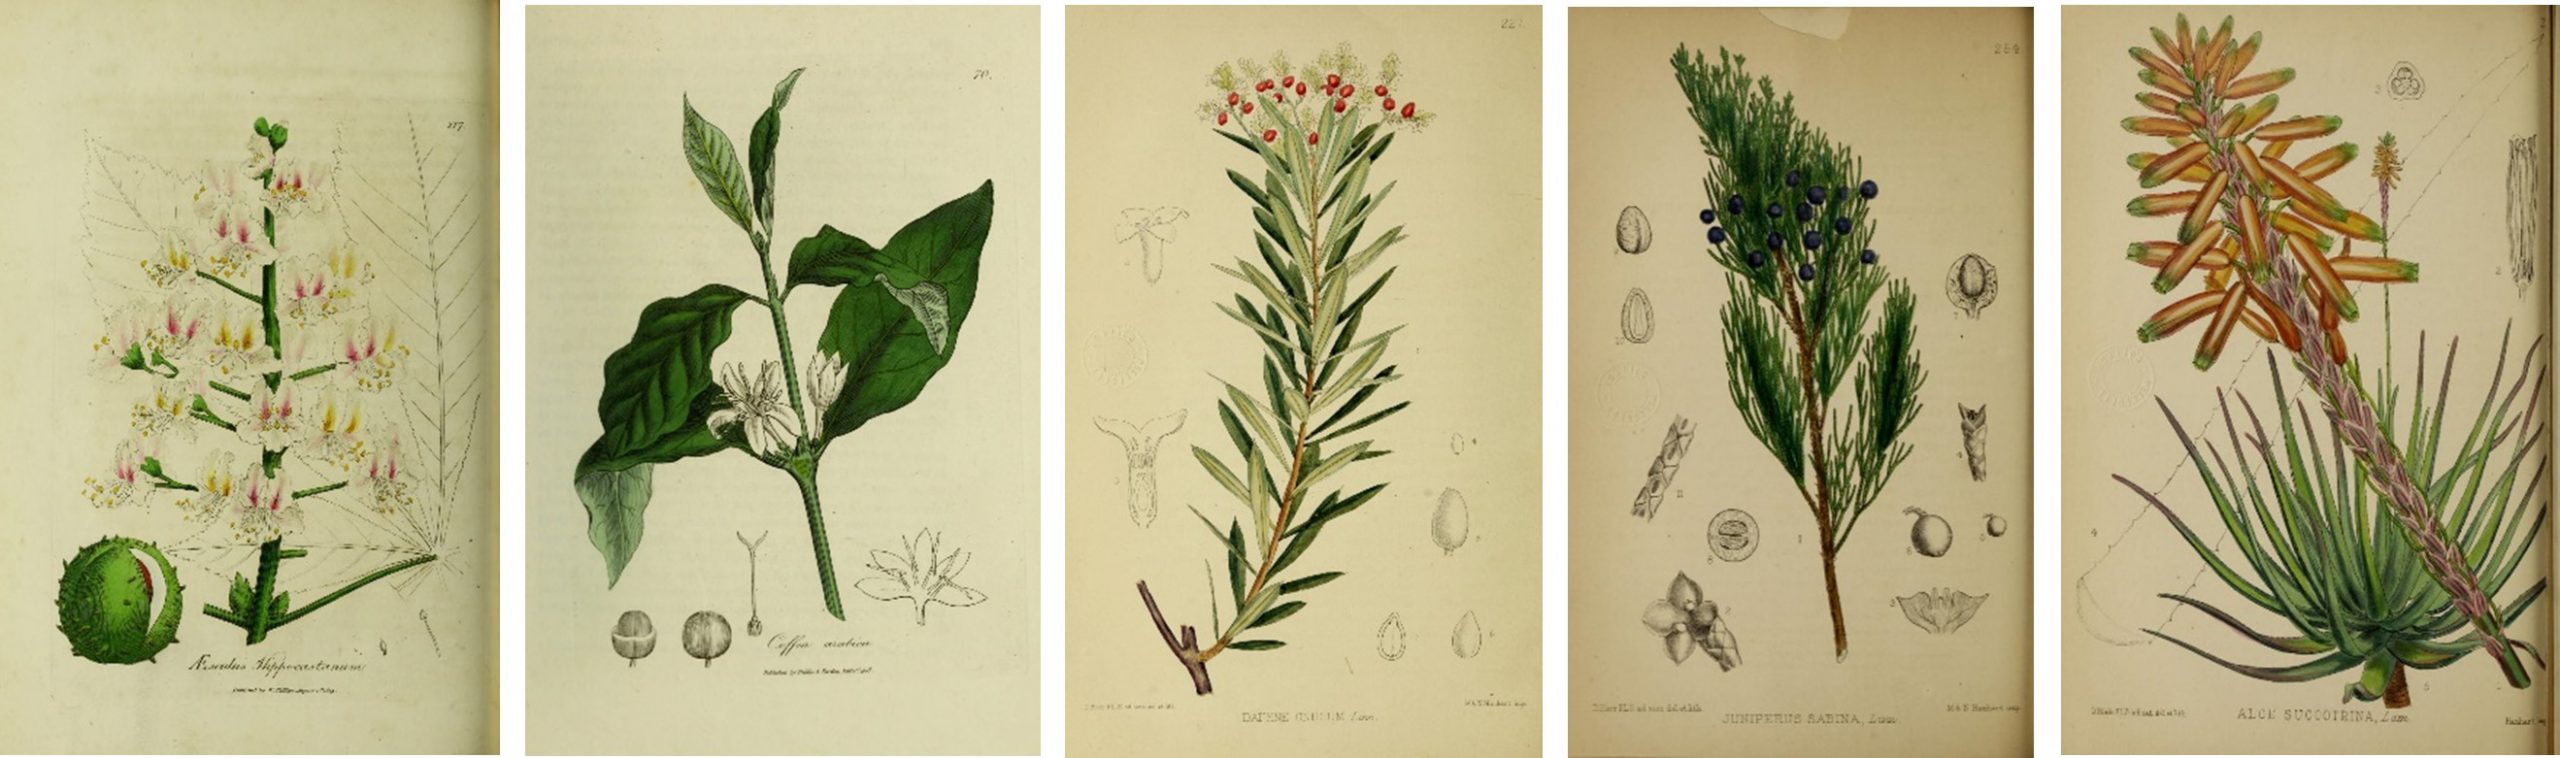 Series of botanical plates including water chestnut,  coffee, flax, juniper, and aloe.